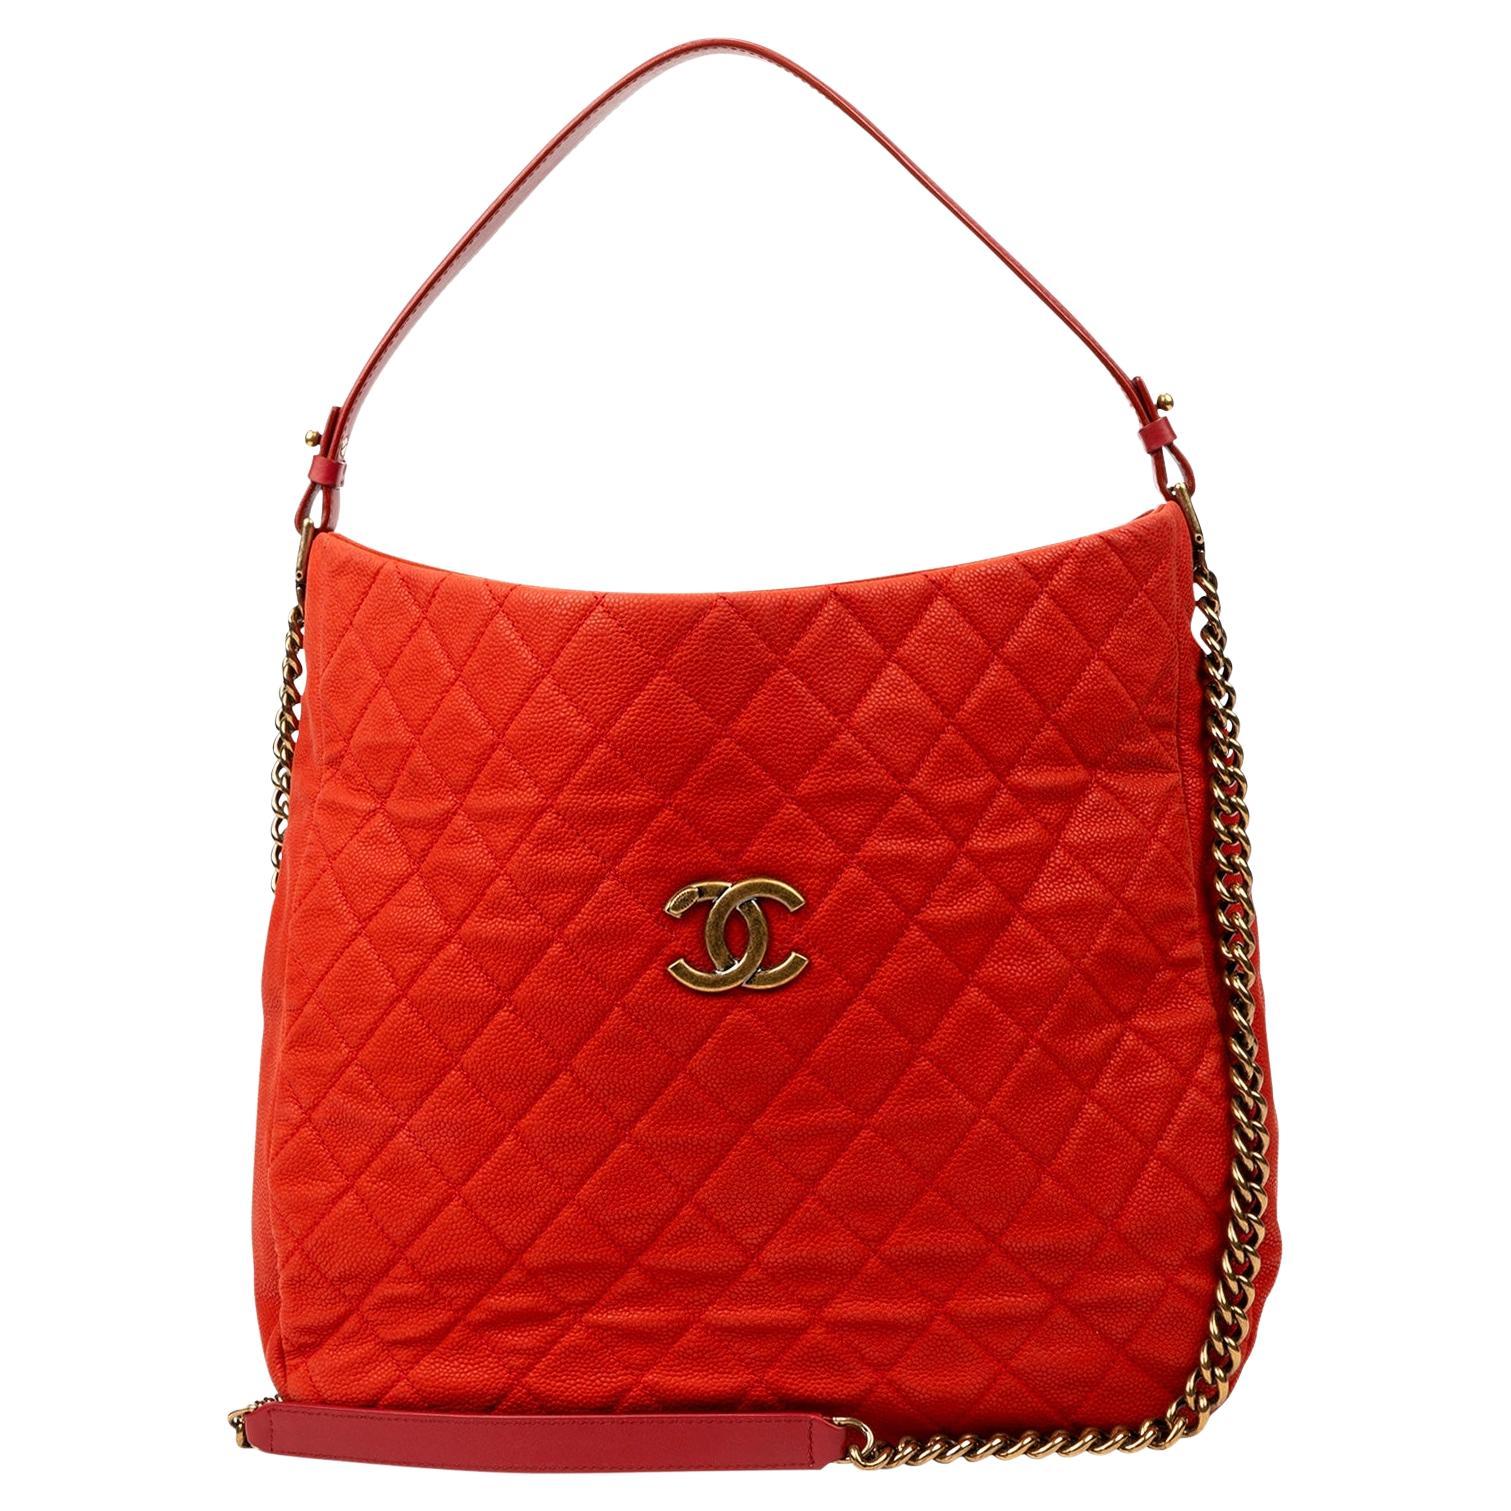 Chanel 2013 Cruise Collection Red Caviar Shopper For Sale